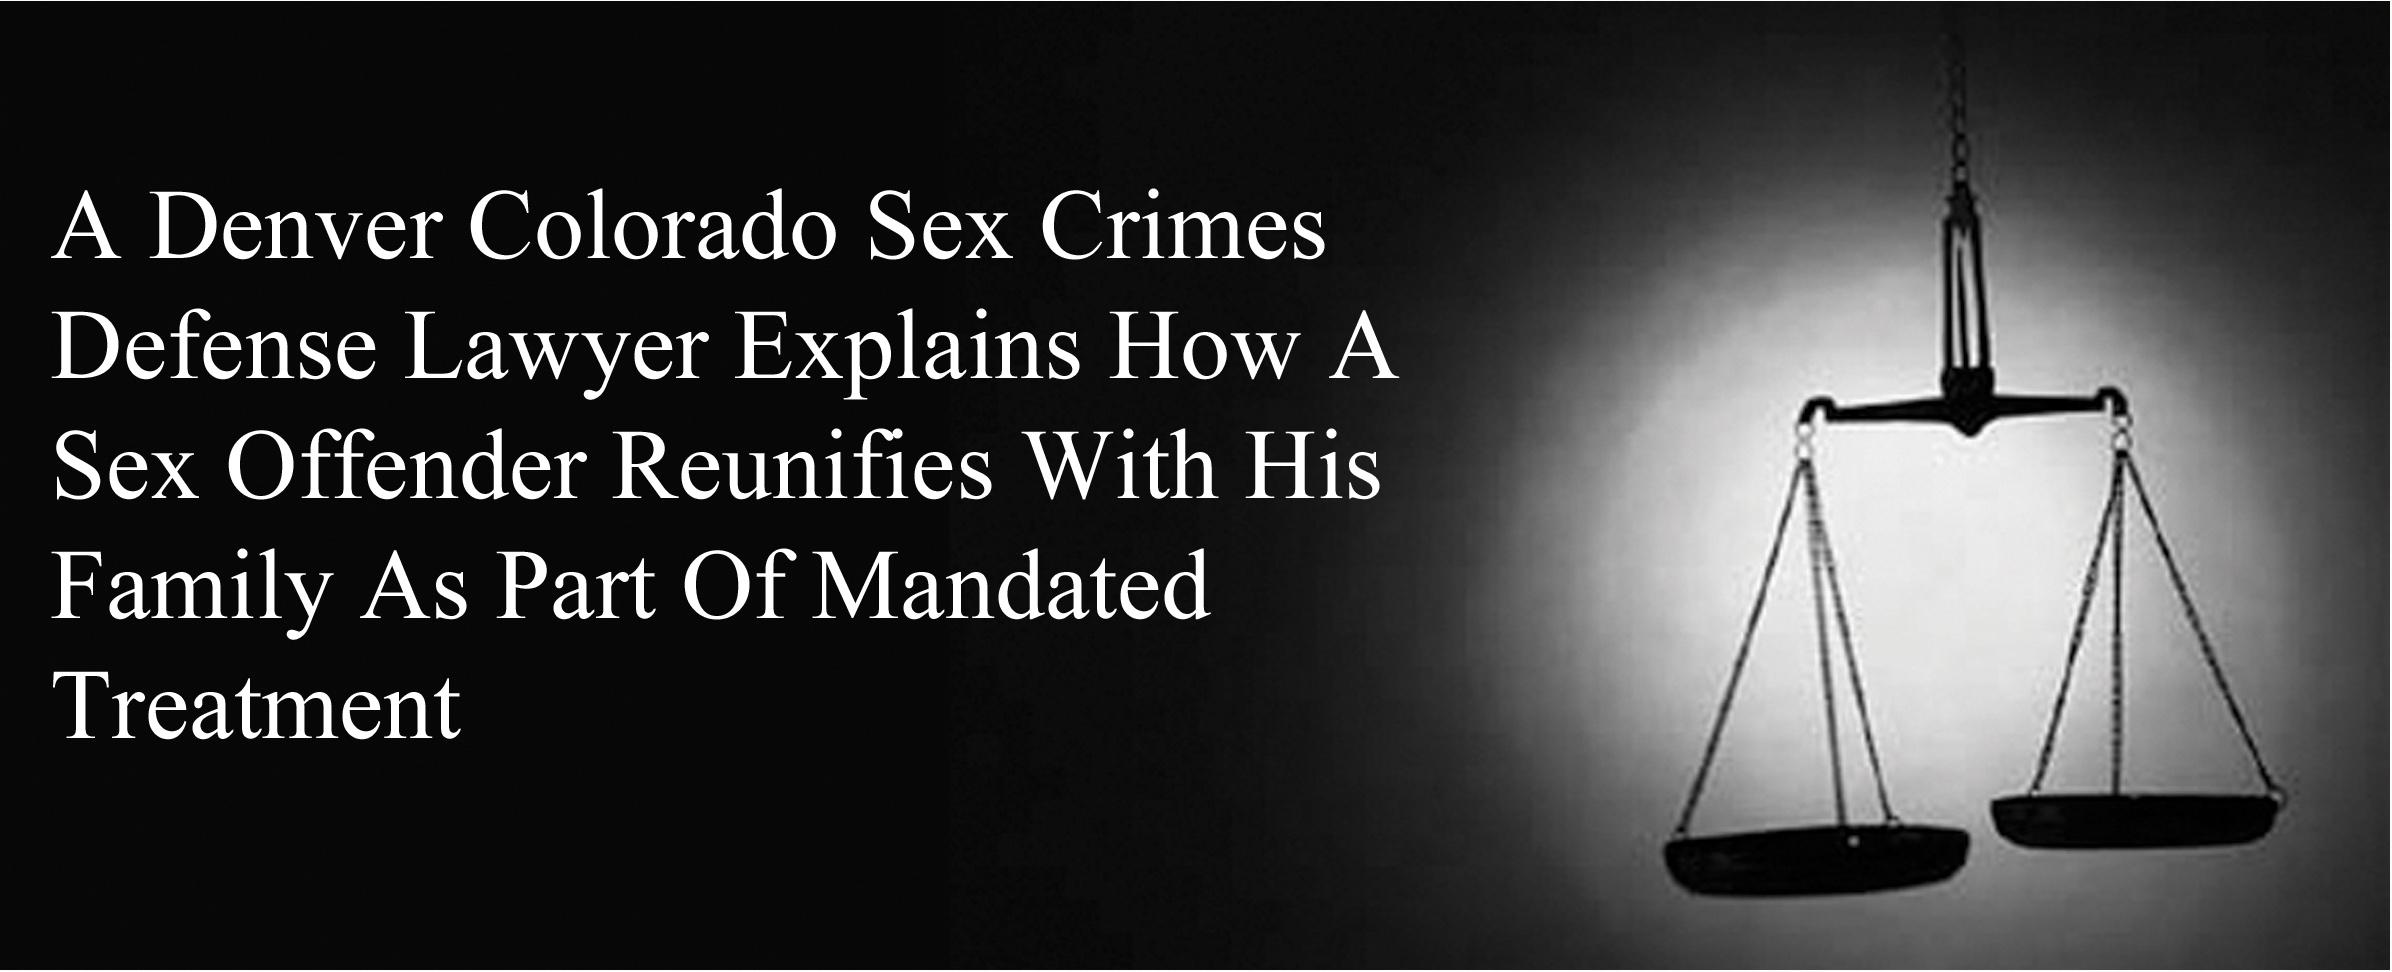 A Denver Colorado Sex Crimes Defense Lawyer Explains How A Sex Offender Reunifies With His Family As Part Of Mandated Treatment Colorado Sex Crimes Lawyer